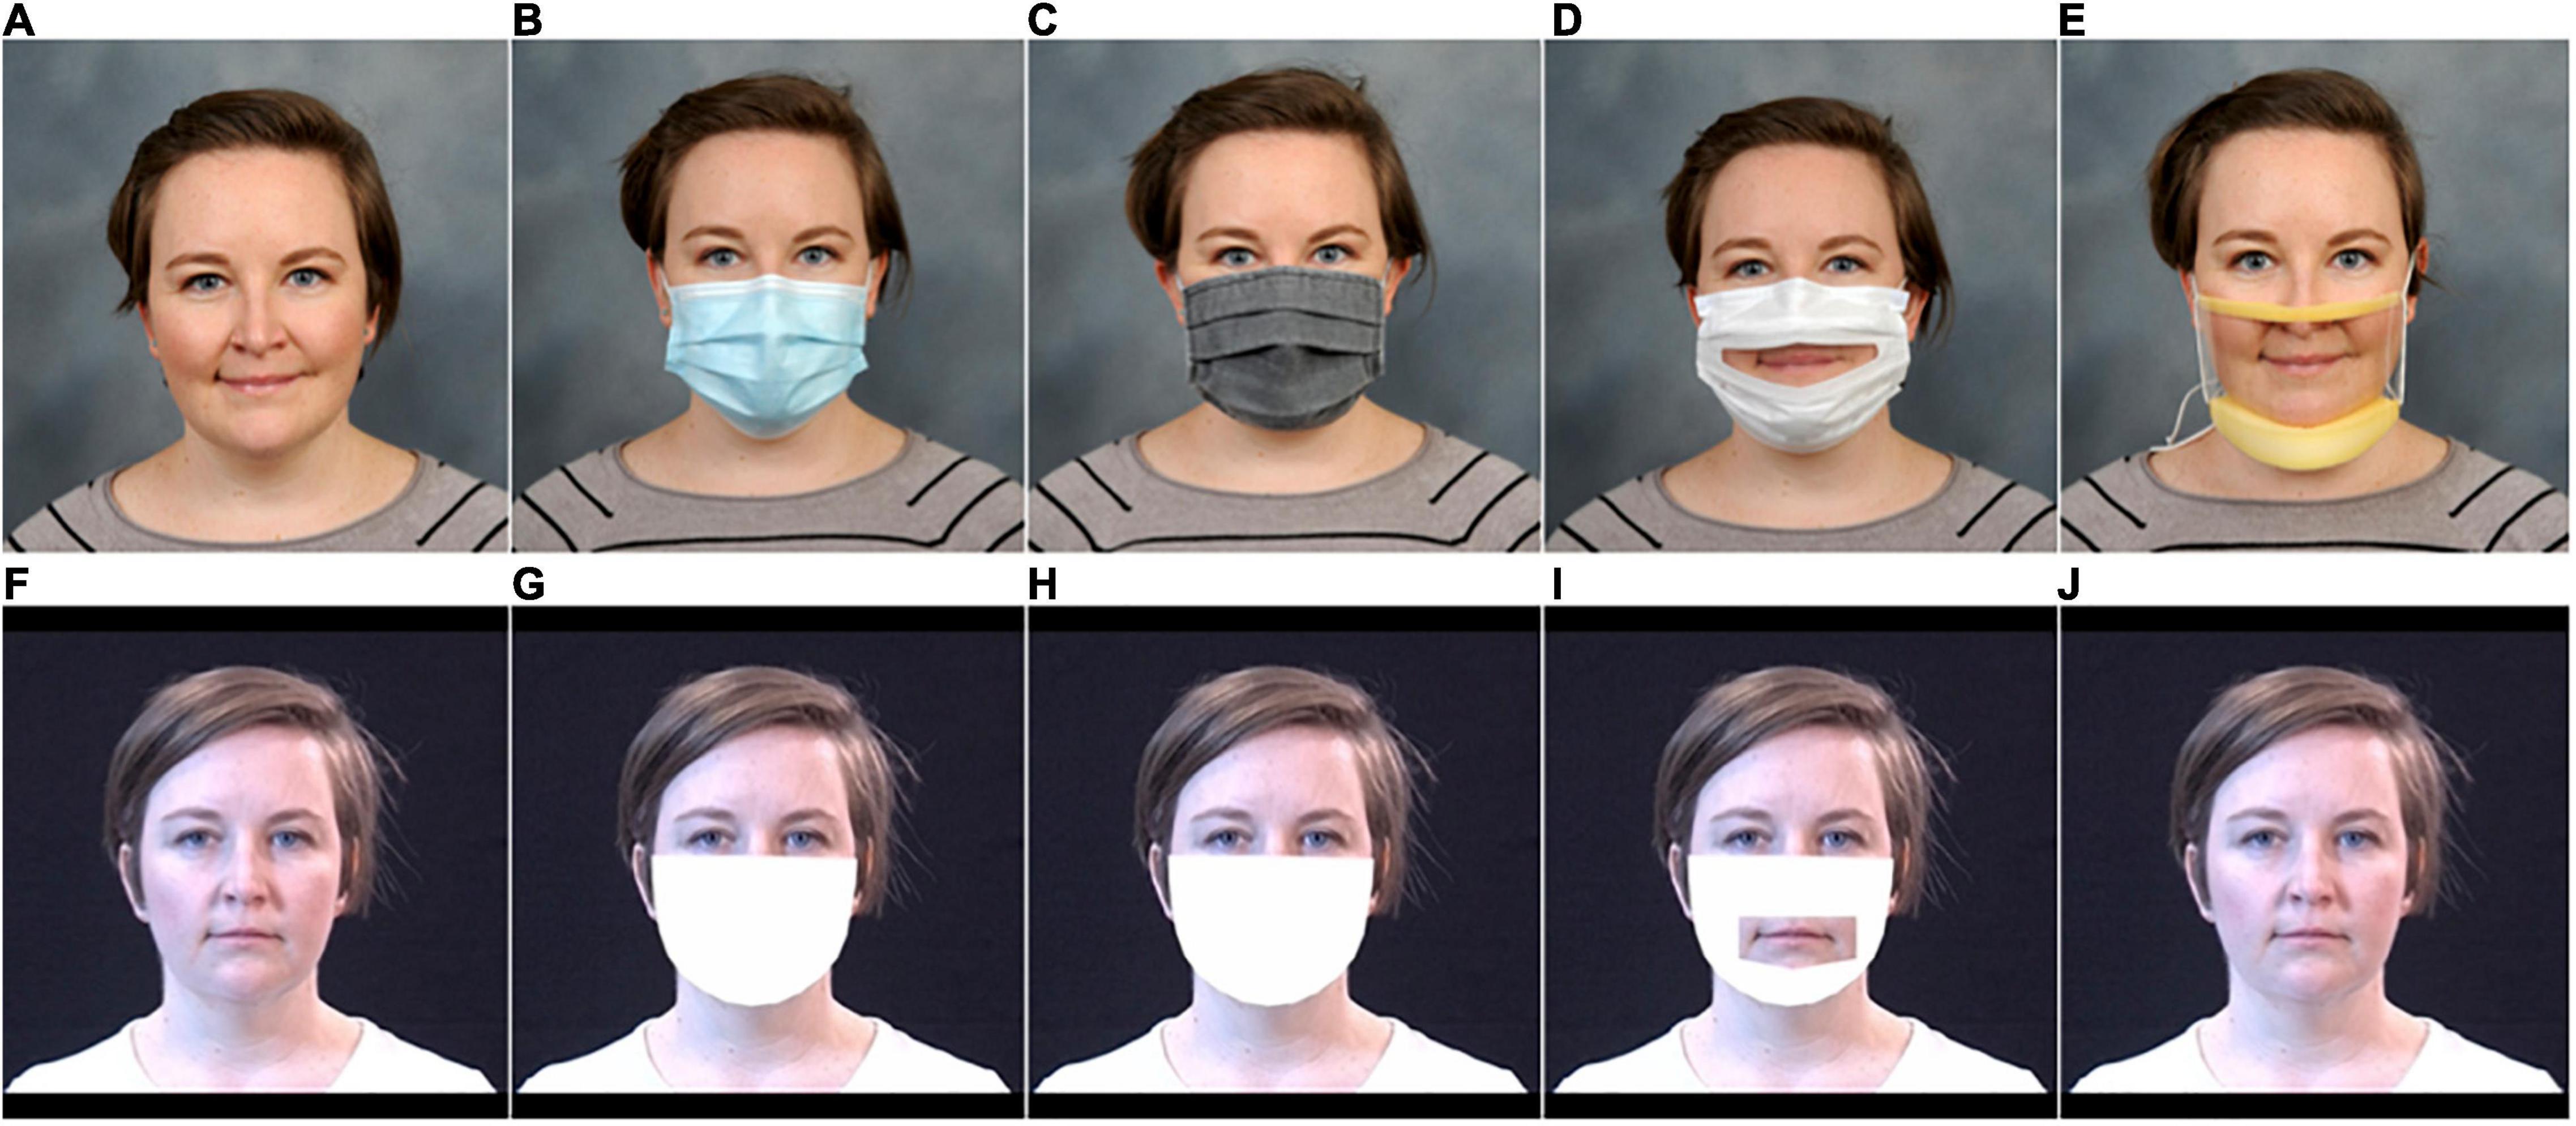 PDF) Teaching Using a Face Protection Mask: How Students of 6-15 Years Old  Perceive Their Teachers' Expressing Emotions during the Teaching Procedure